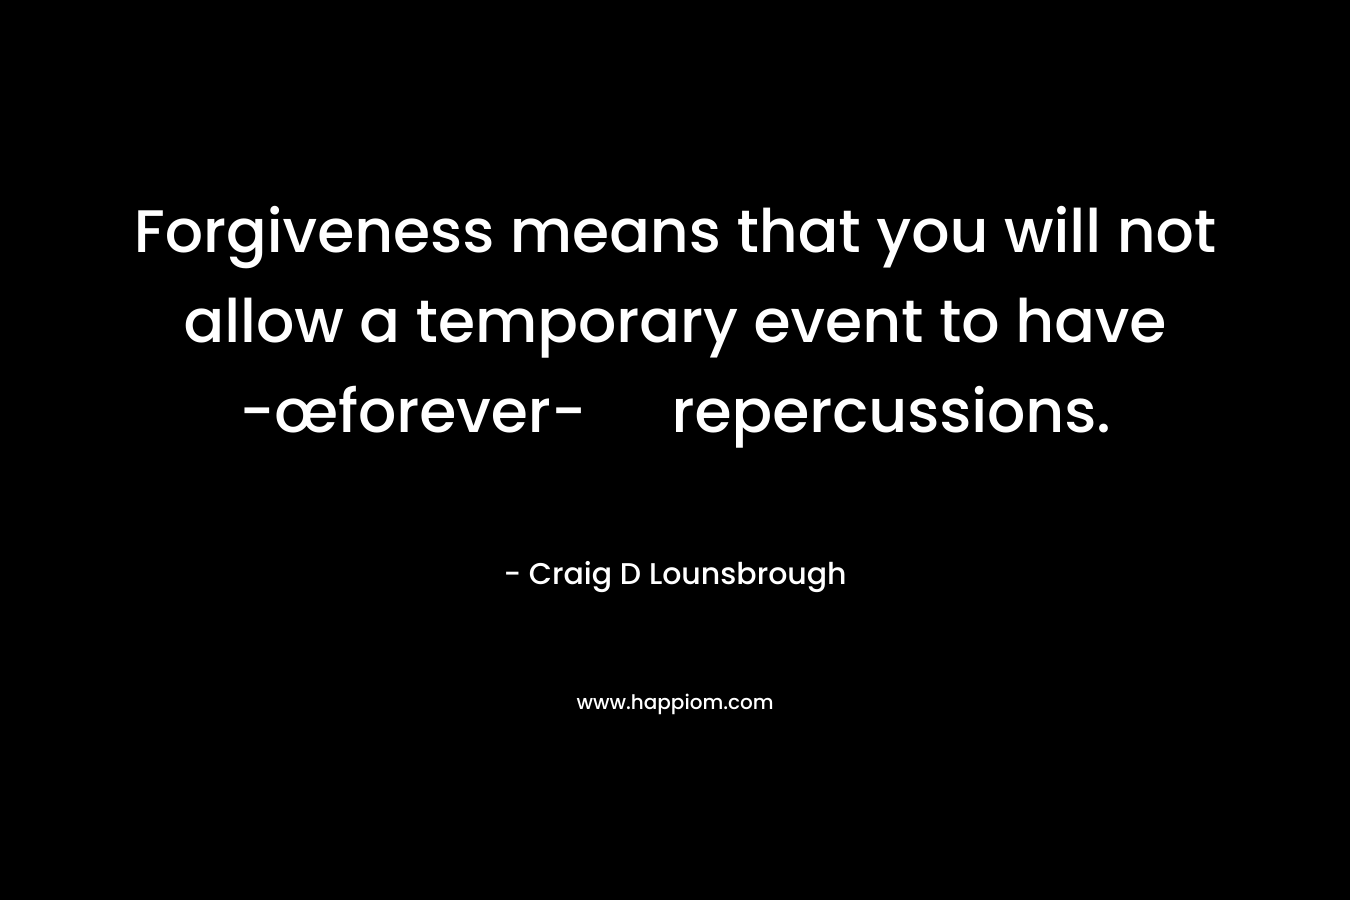 Forgiveness means that you will not allow a temporary event to have -œforever- repercussions.